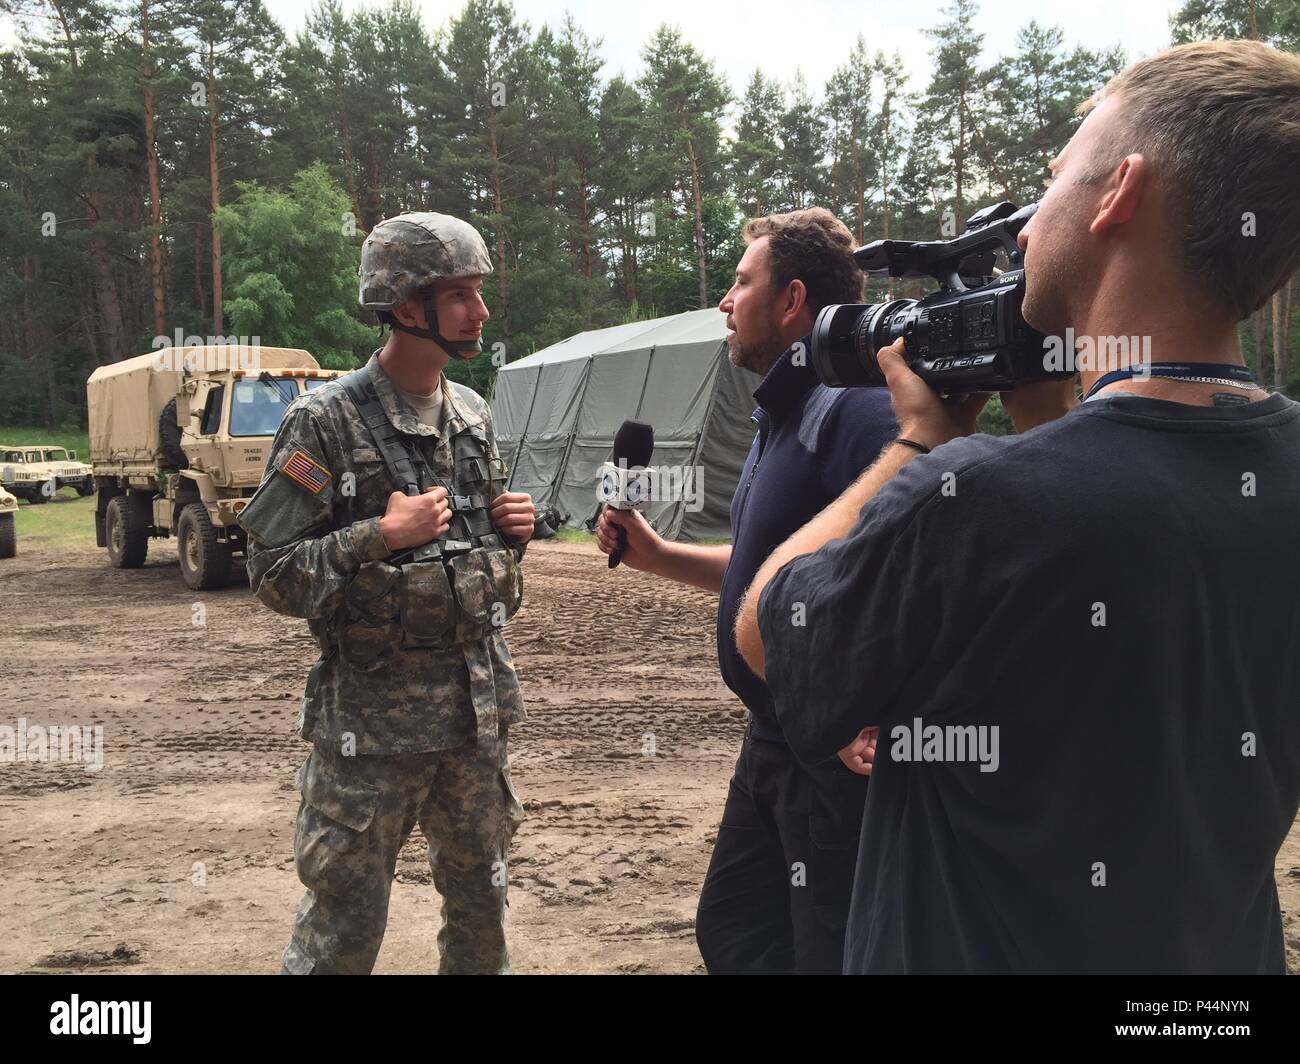 U.S. Army Reserve Pfc. James Hale, a Transportation Management Coordinator with the 382nd Combat Sustainment Support Battalion, Joint Base Lewis-McChord, Washington, is interviewed by a Polish television reporter during Exercise Anakonda 2016 at the Drawsko Pomorskie Training Area, Poland, June 14. Hale, the son of American missionaries, was born in Poland and has lived most of his life there. He has served as a Polish translator for the soldiers in his unit during their time in Poland. Exercise Anakonda 2016 is a Polish-led, joint multinational exercise taking place throughout Poland June 7-1 Stock Photo